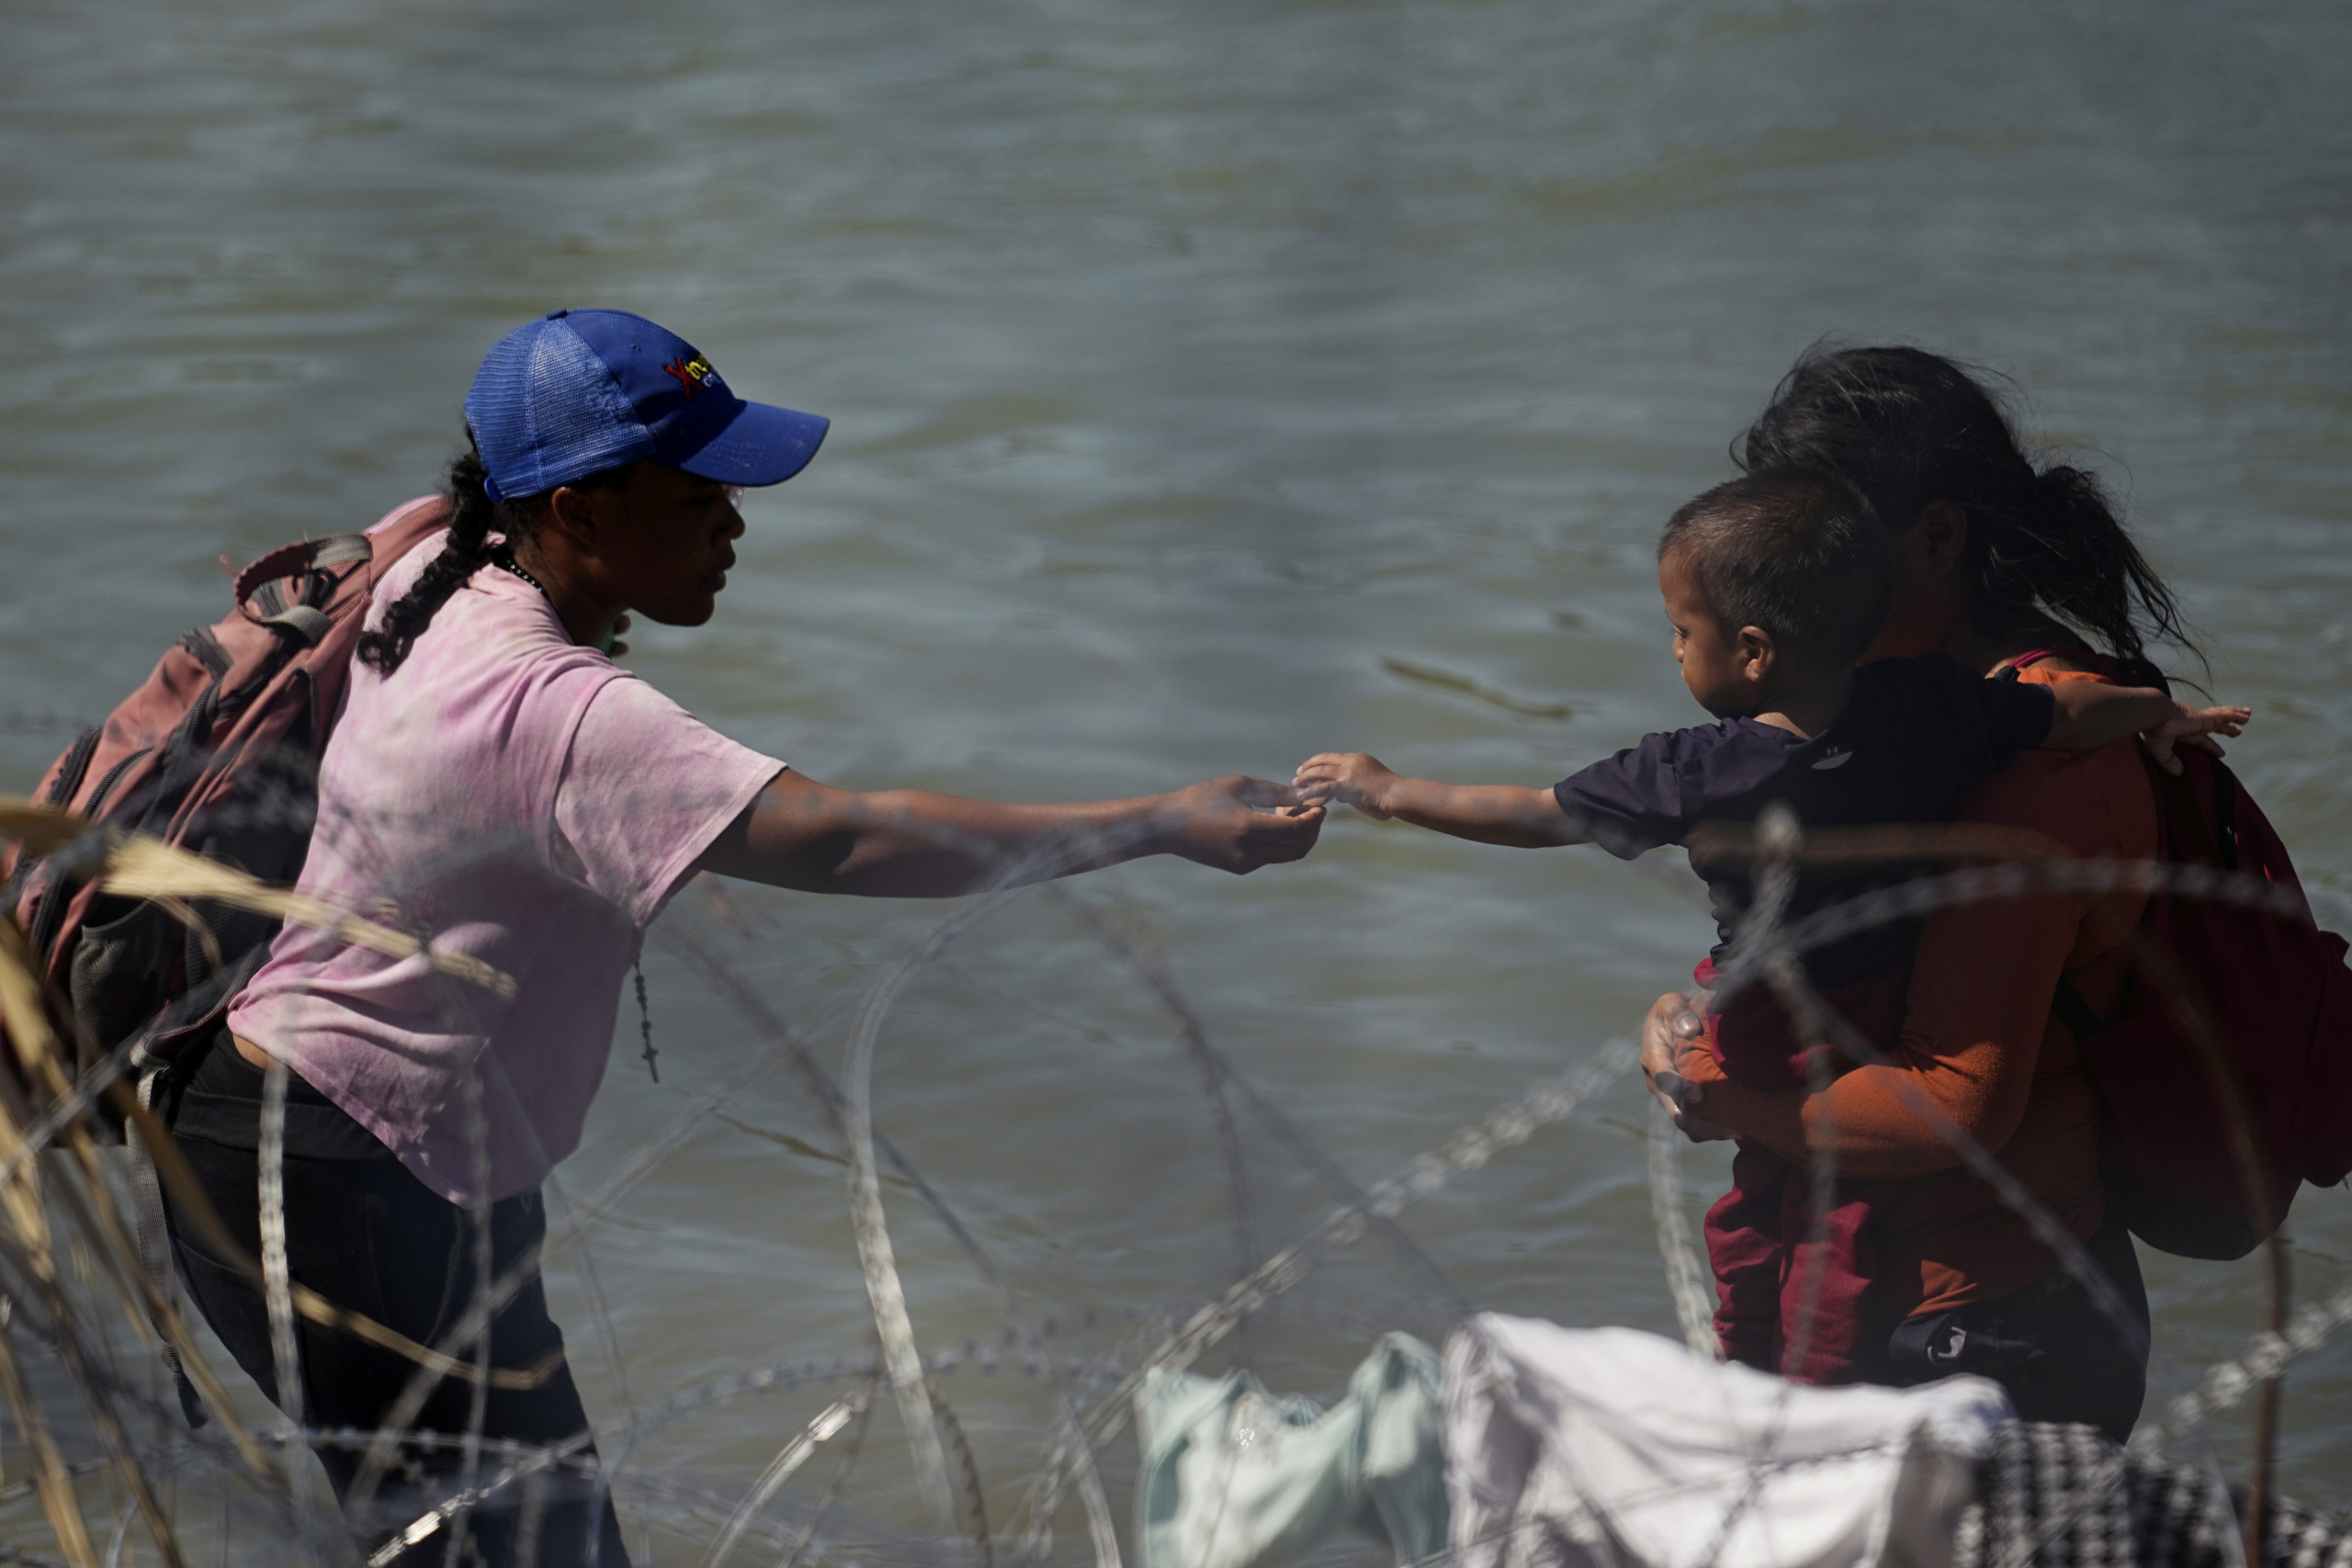 A young boy is passed food as migrants who crossed into the U.S. from Mexico are met with concertina wire along the Rio Grande, Thursday, Sept. 21, 2023, in Eagle Pass, Texas. (AP Photo/Eric Gay)